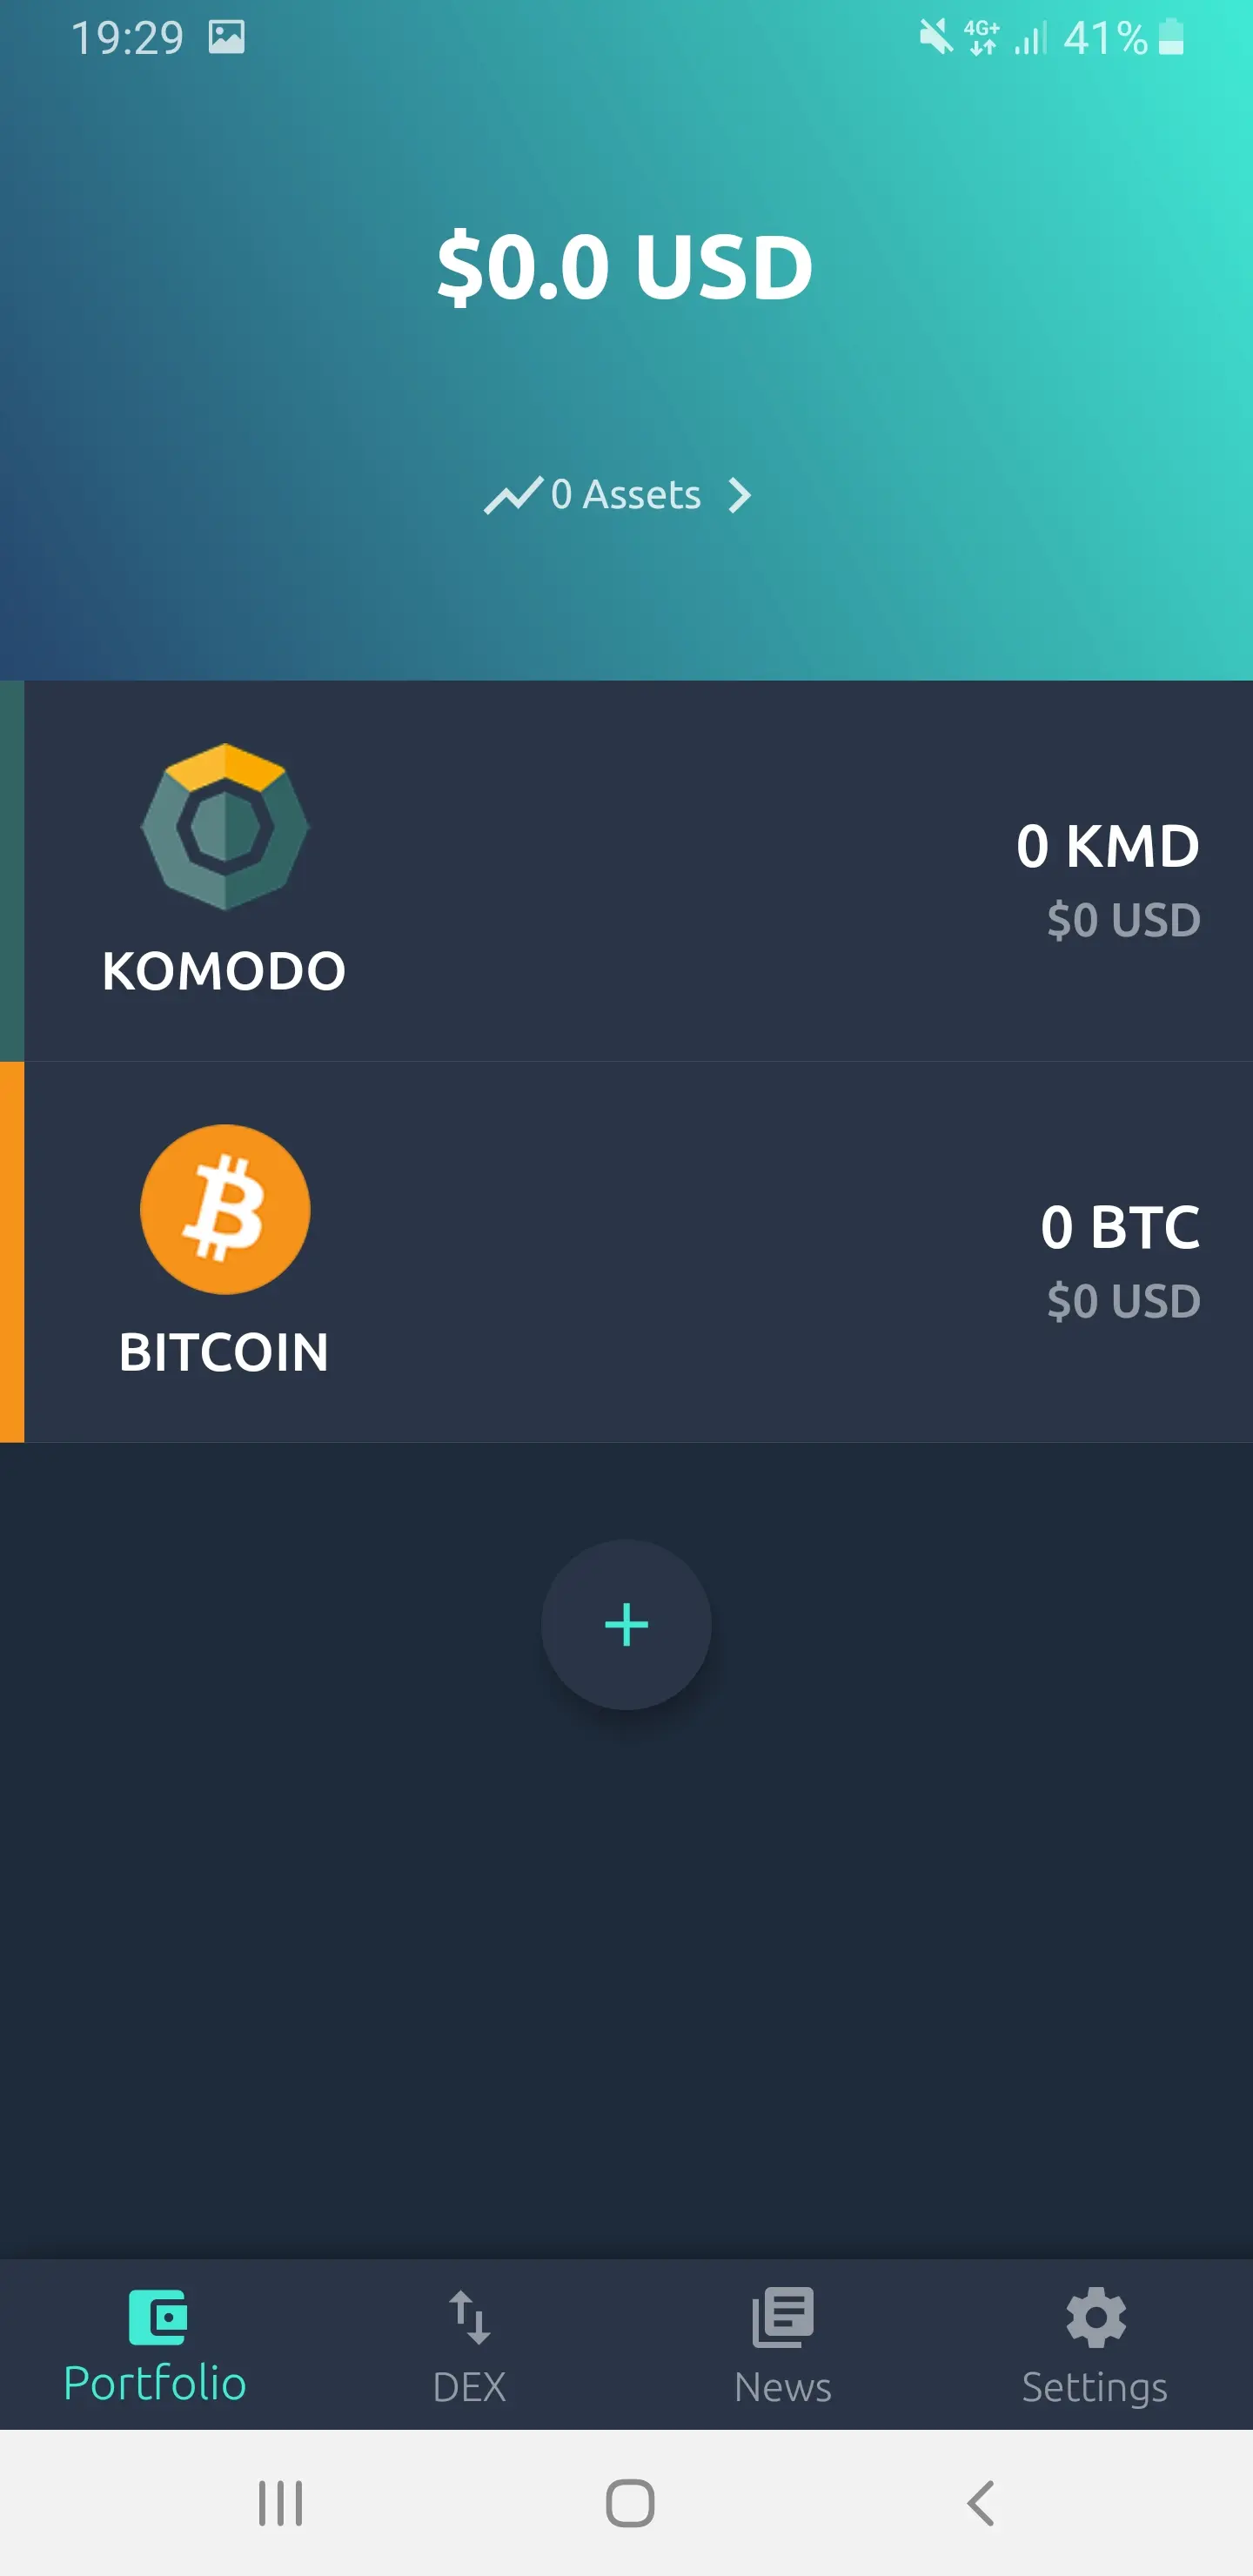 How to create a new wallet using Komodo Mobile Wallet